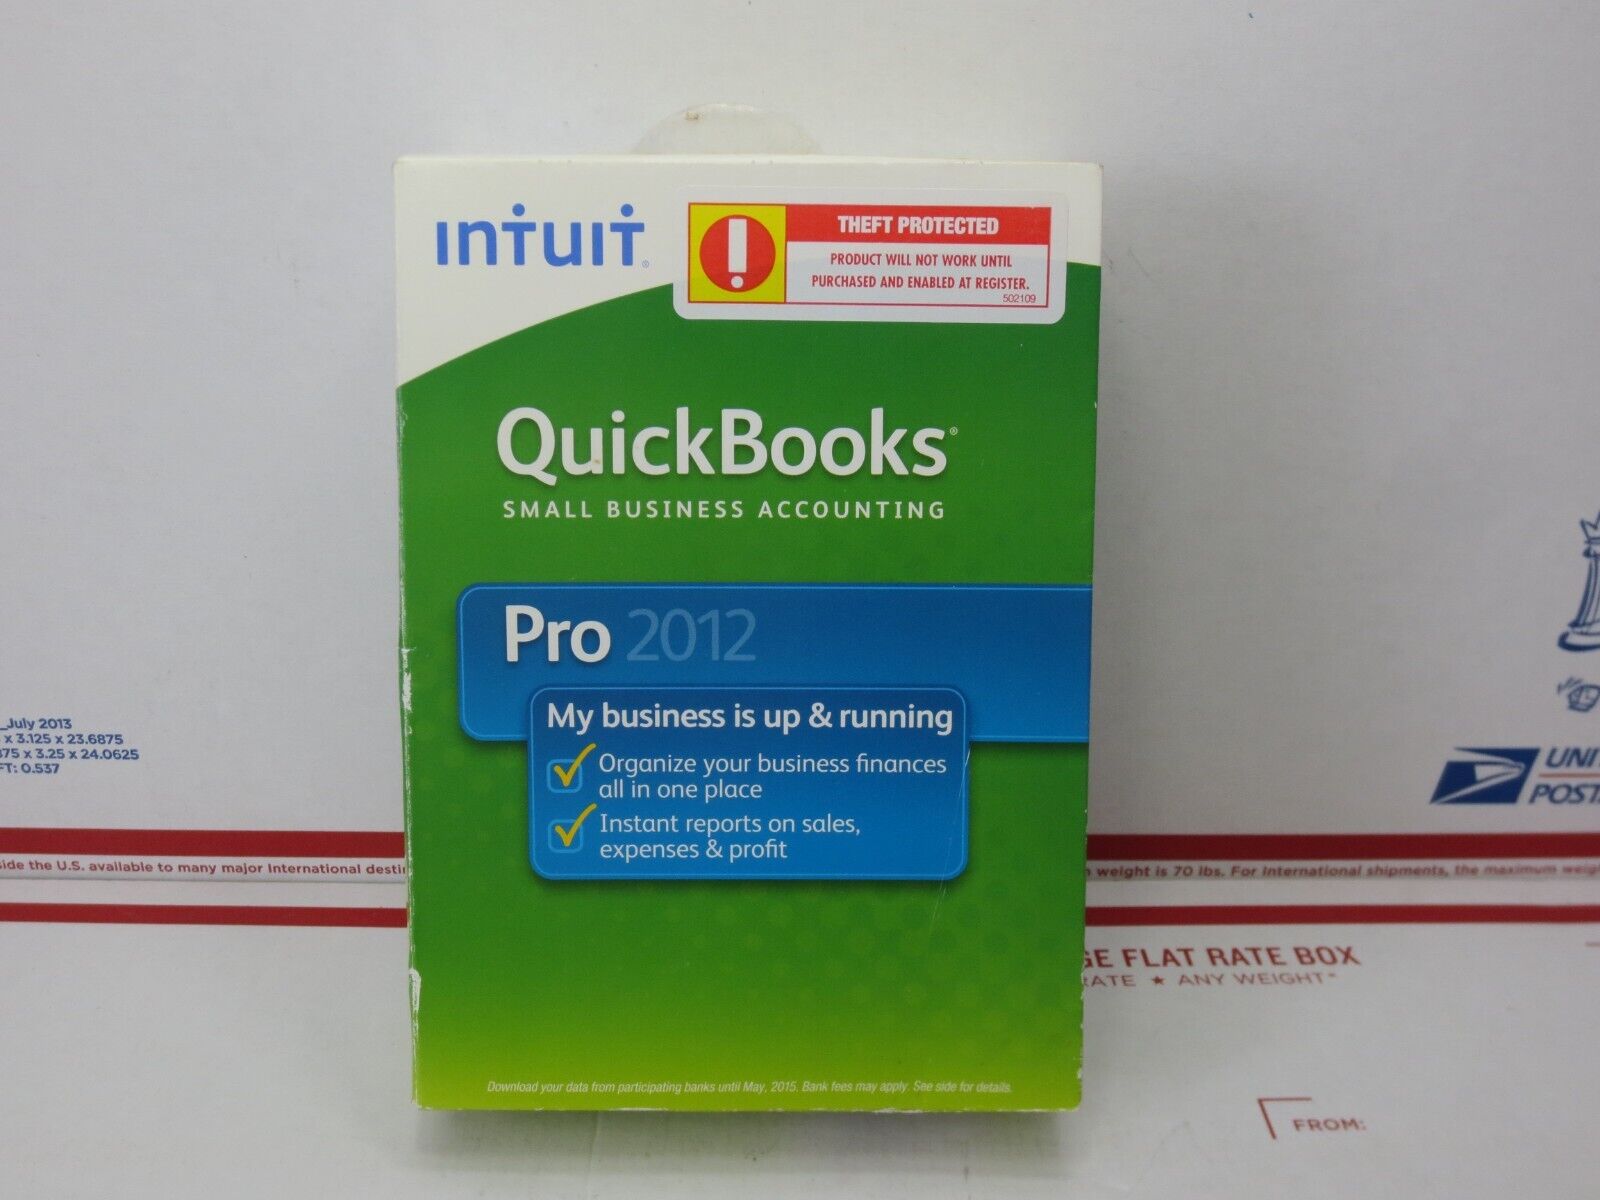 Intuit QuickBooks Pro 2012 Small Business Accounting Windows 7 with Lifetime Key